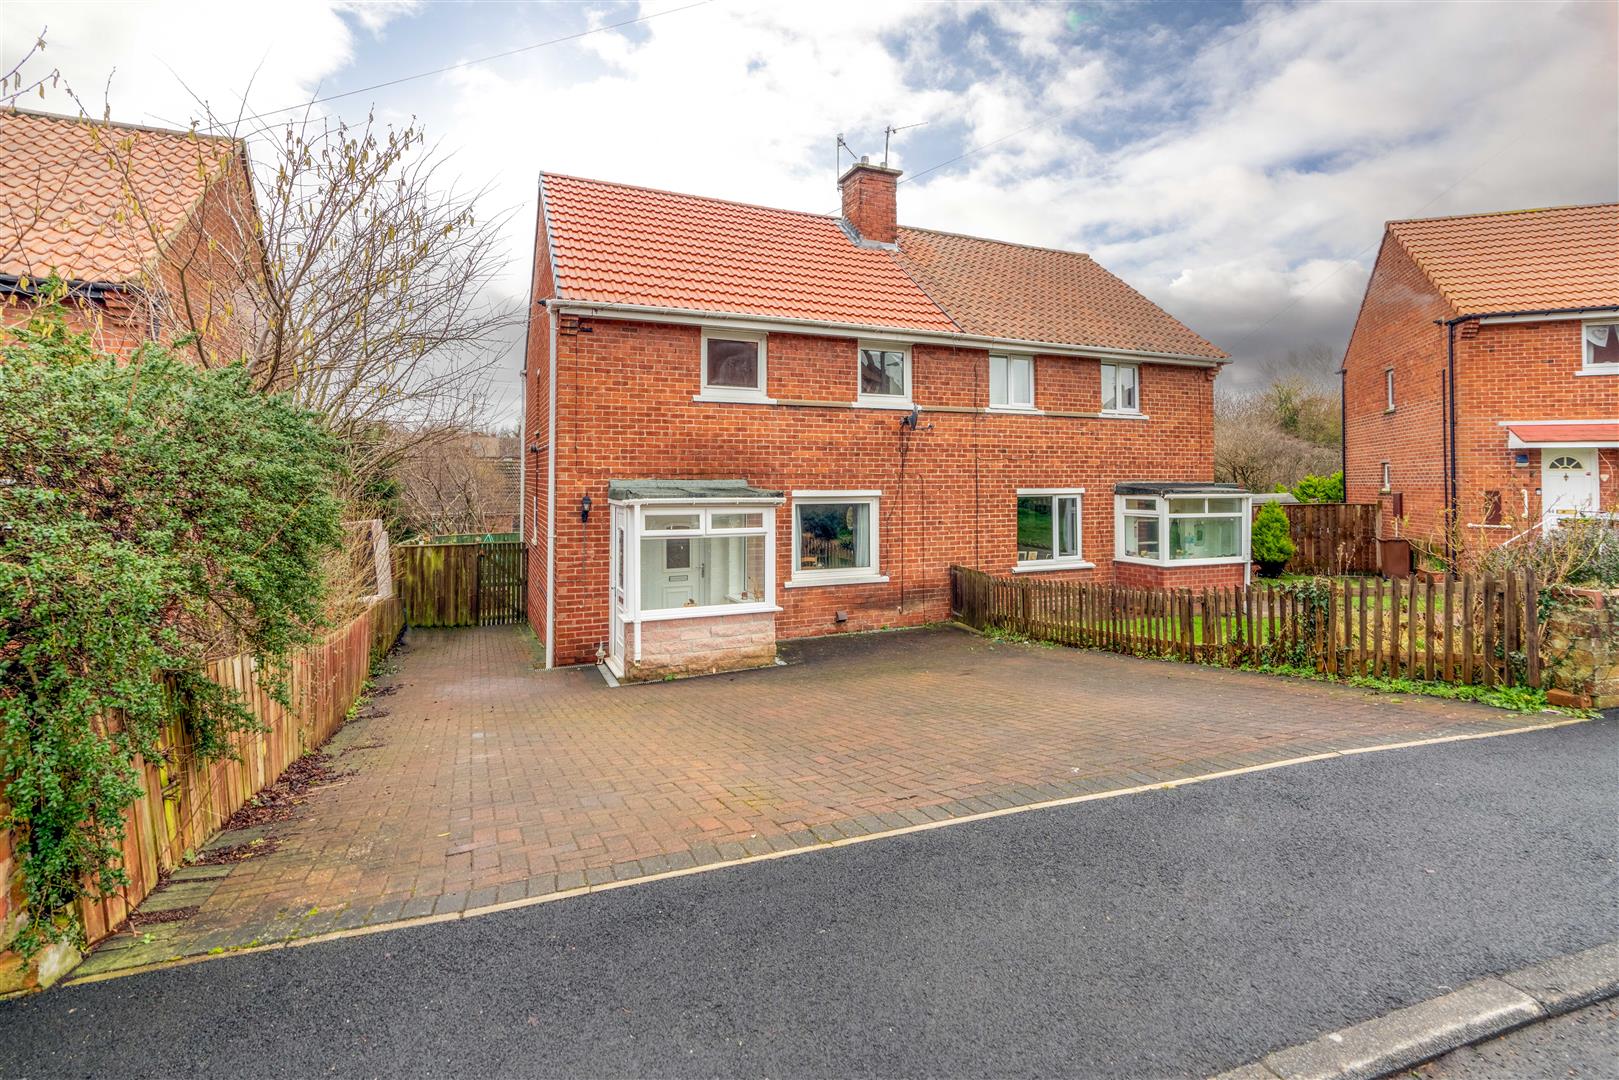 3 bed semi-detached house for sale in Postern Crescent, Morpeth 24